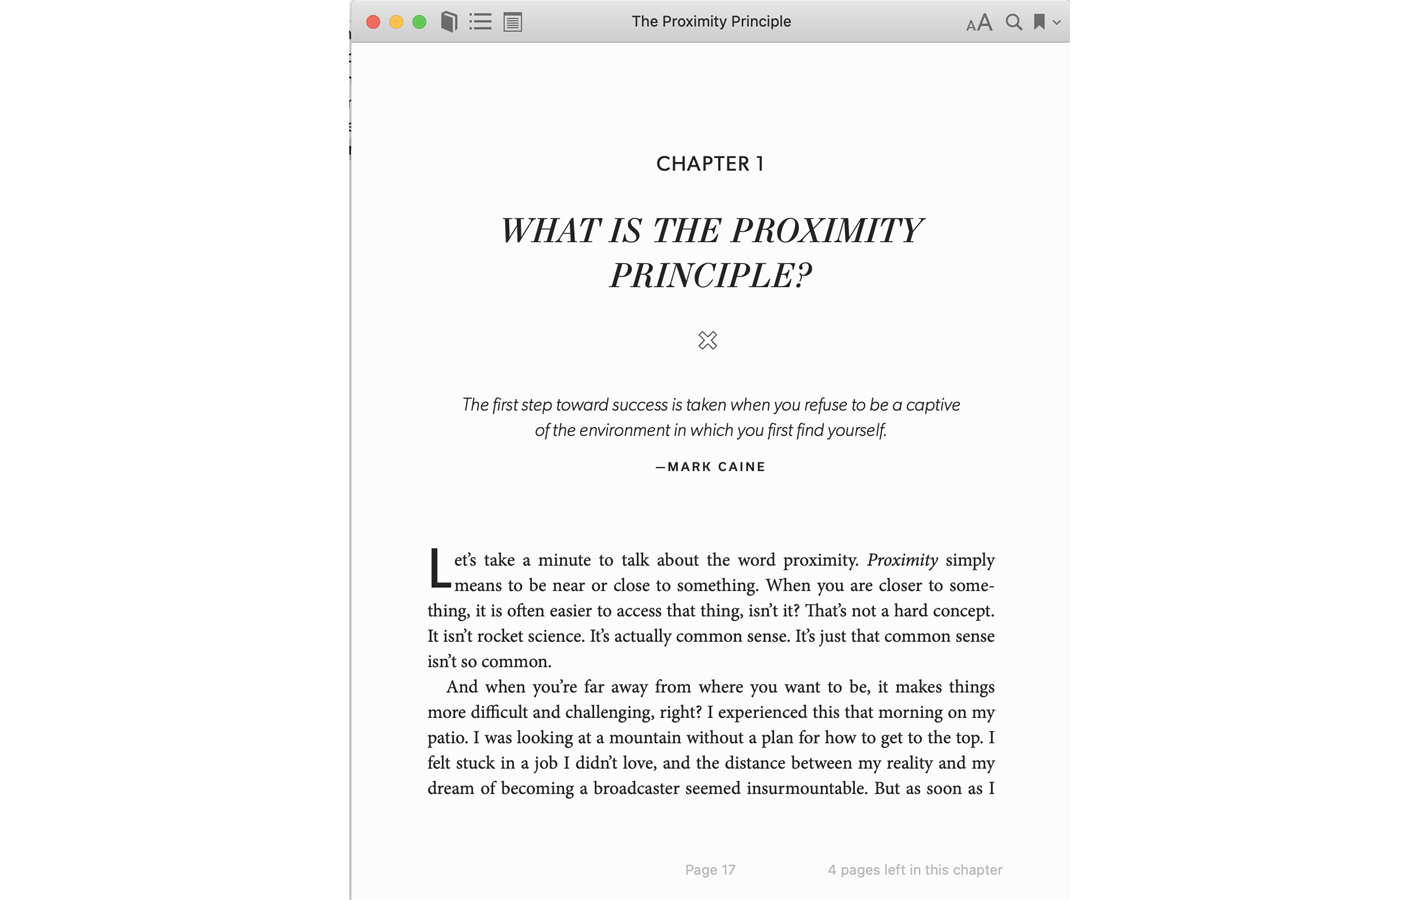 Page 17 for The Proximity Principle